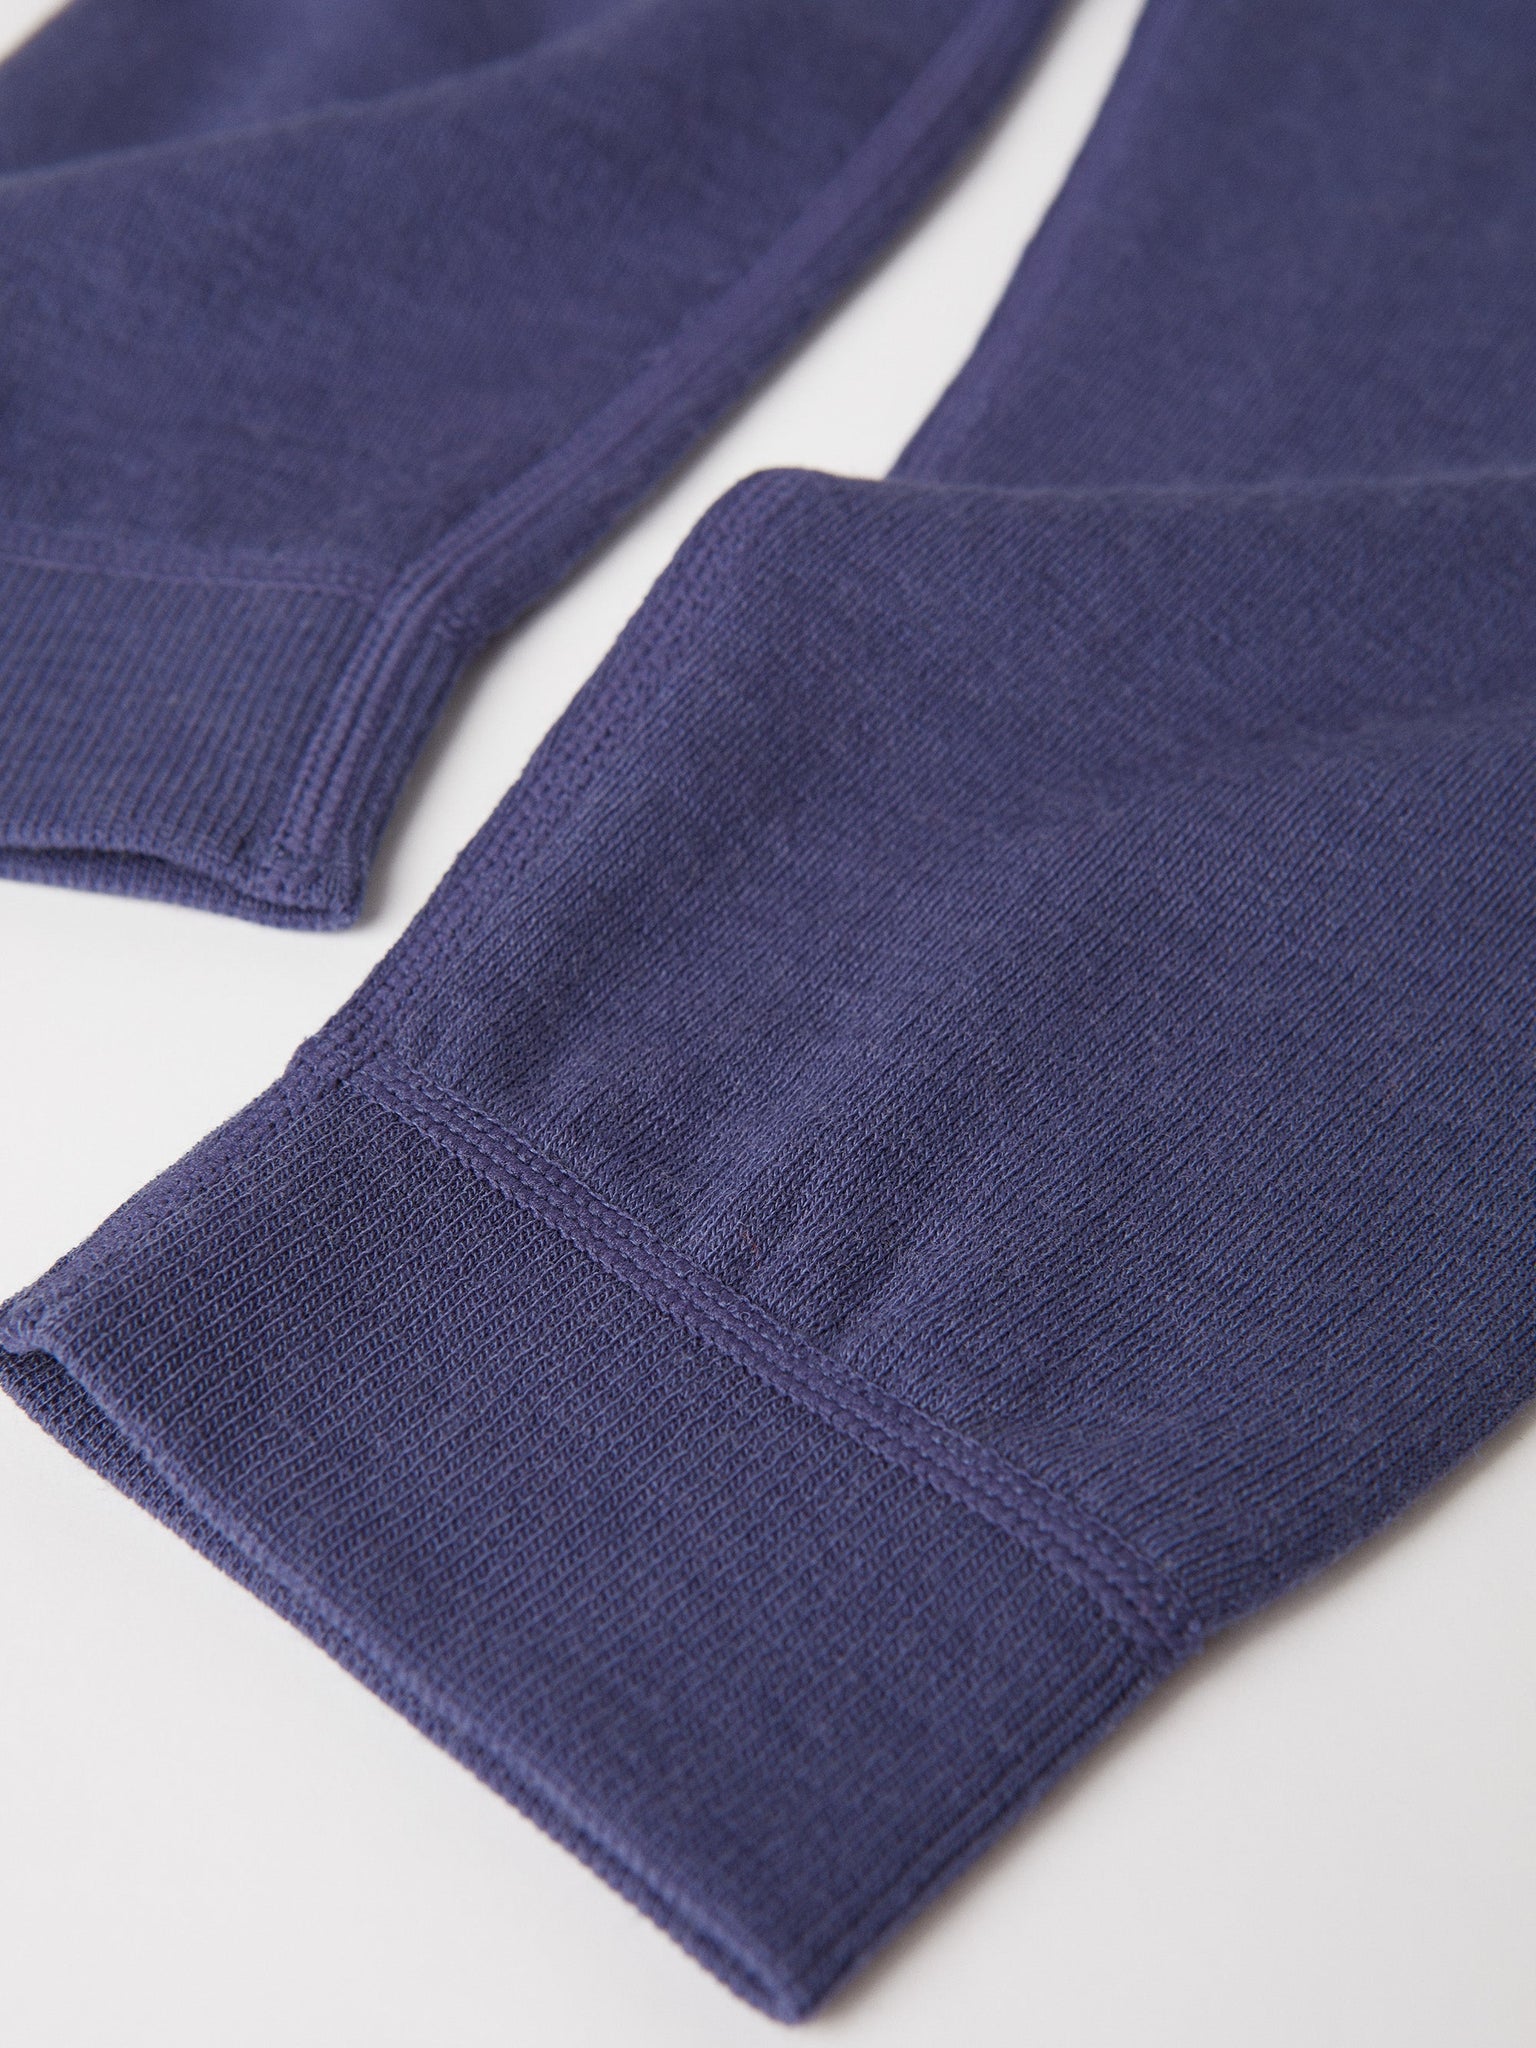 Terry Wool Purple Kids Thermal Leggings from the Polarn O. Pyret outerwear collection. Quality kids clothing made to last.